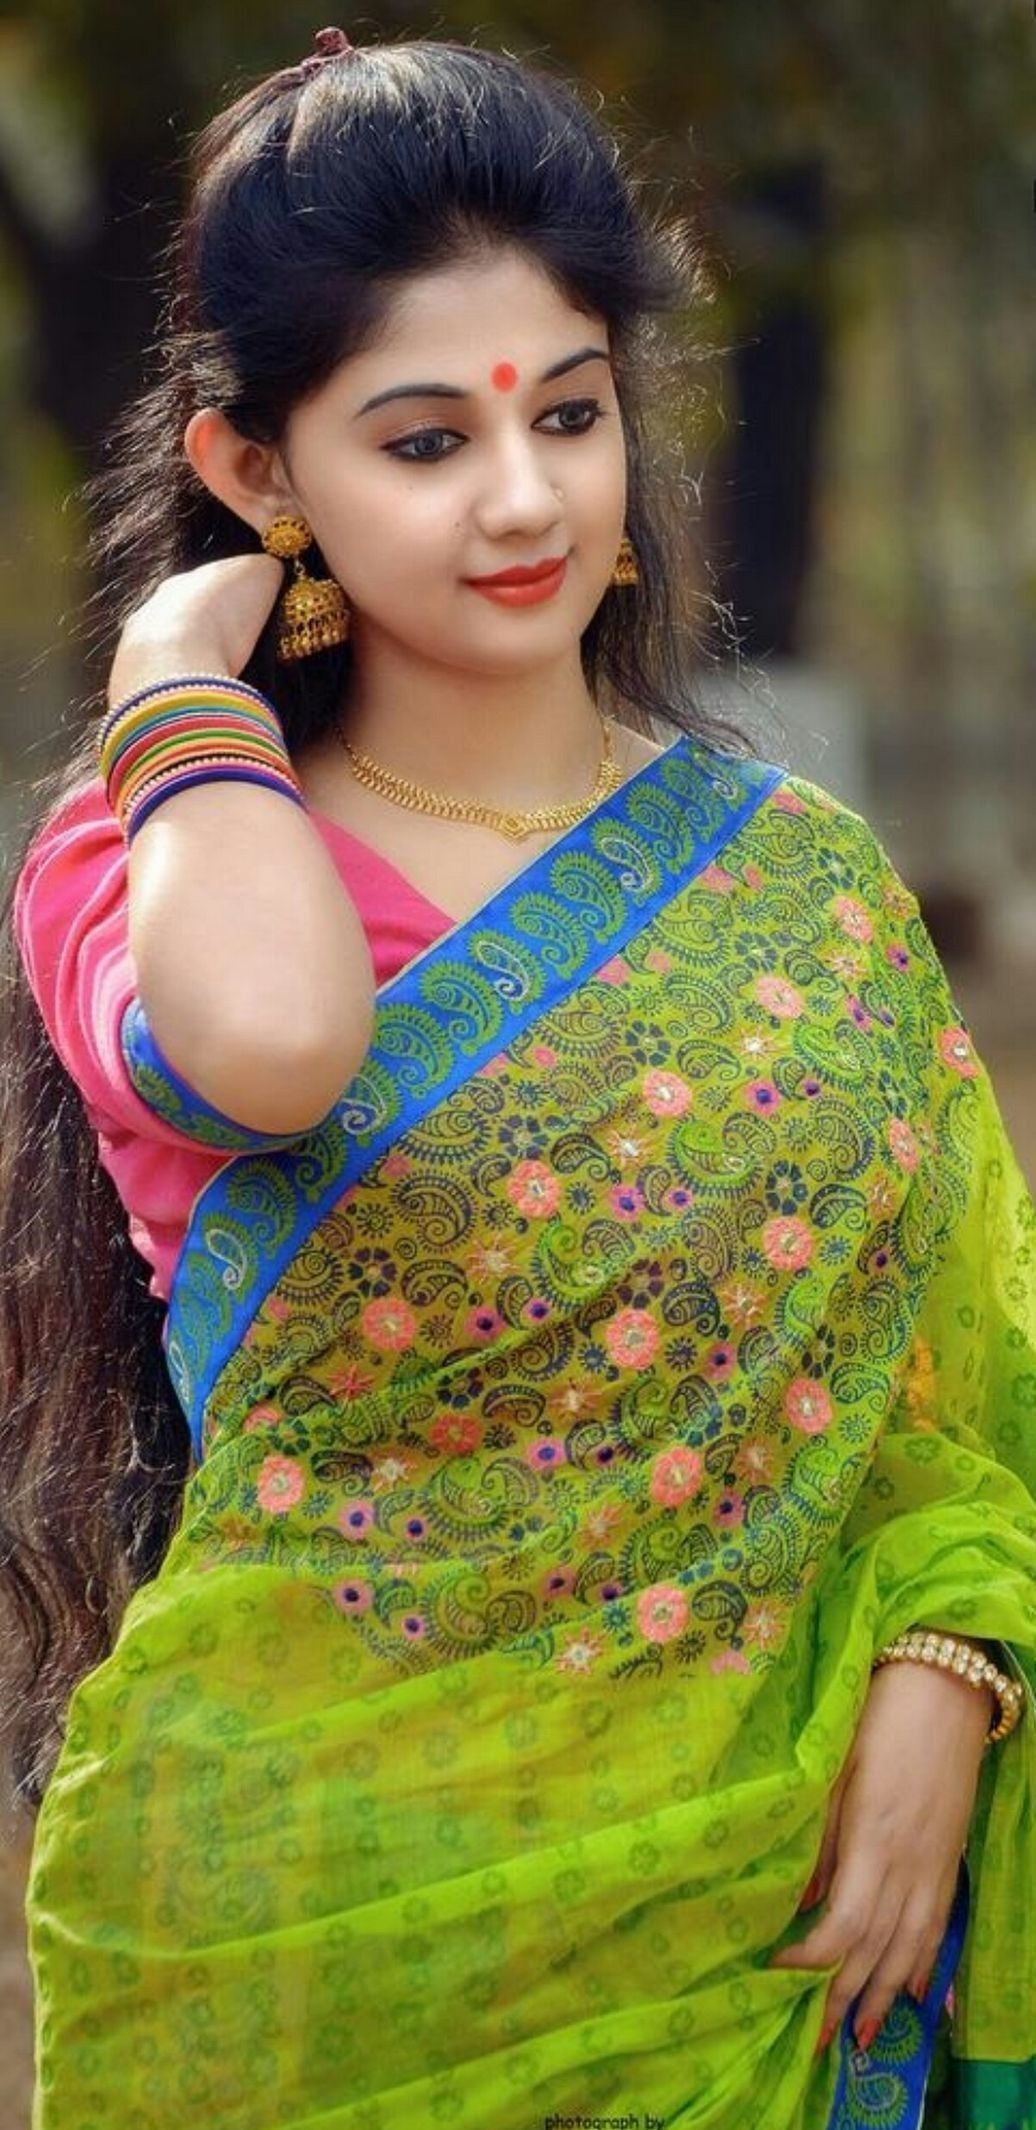 indian beauty in saree wallpaper